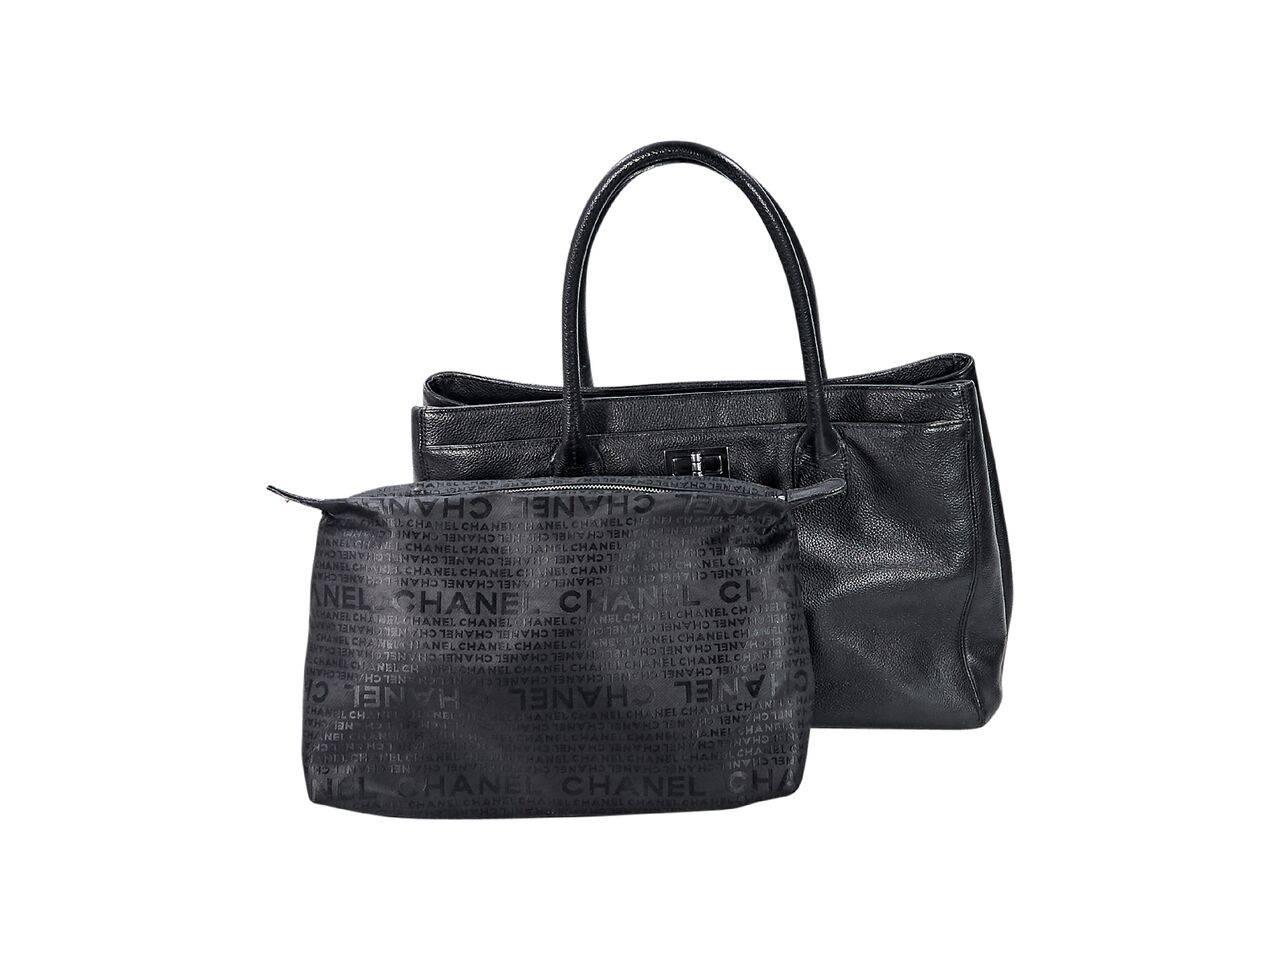 Women's Chanel Black Leather Reissue Tote Bag